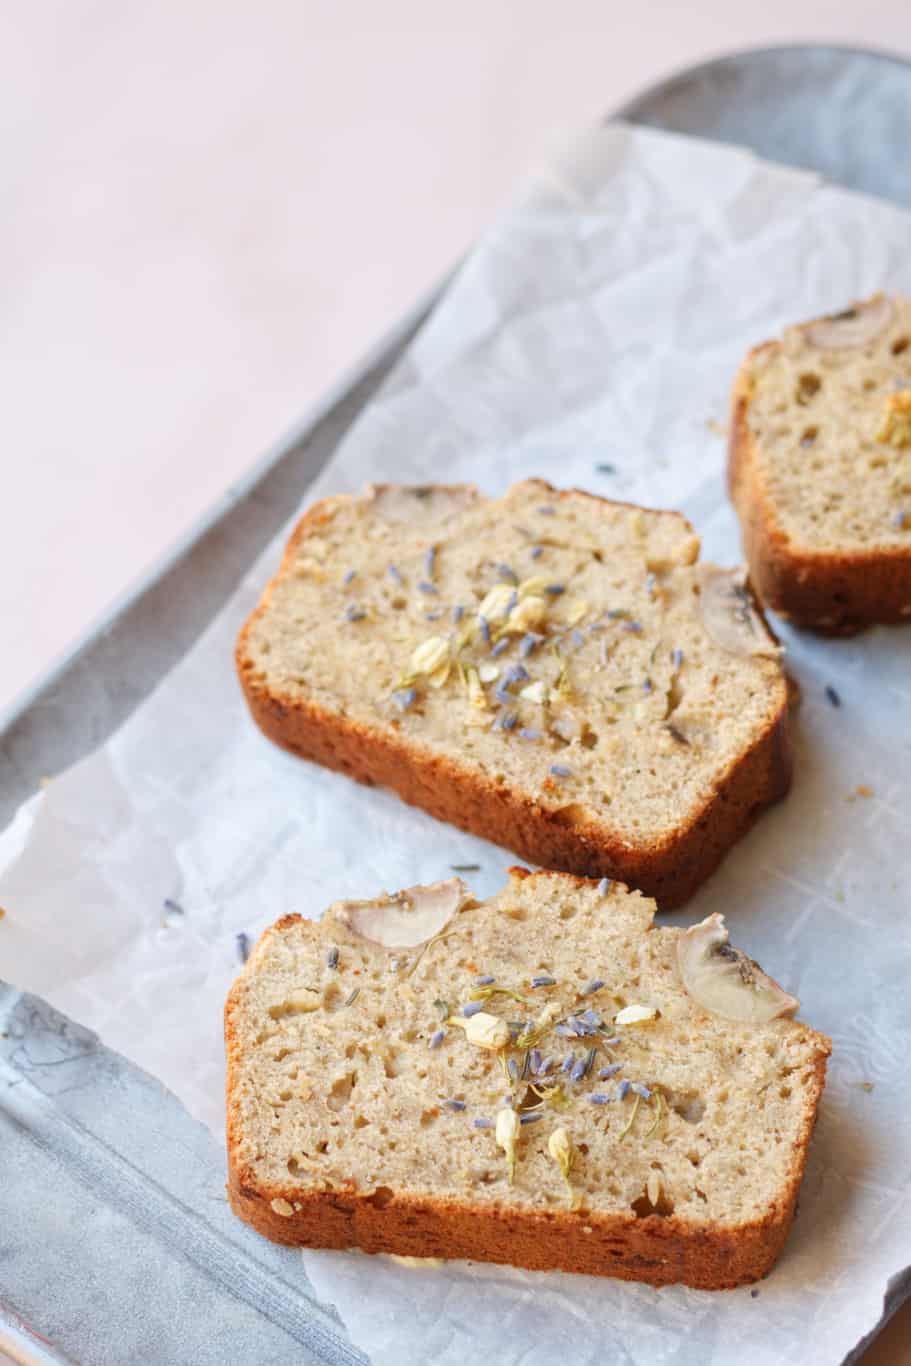 moist and delicious banana bread made with a handful of ingredients